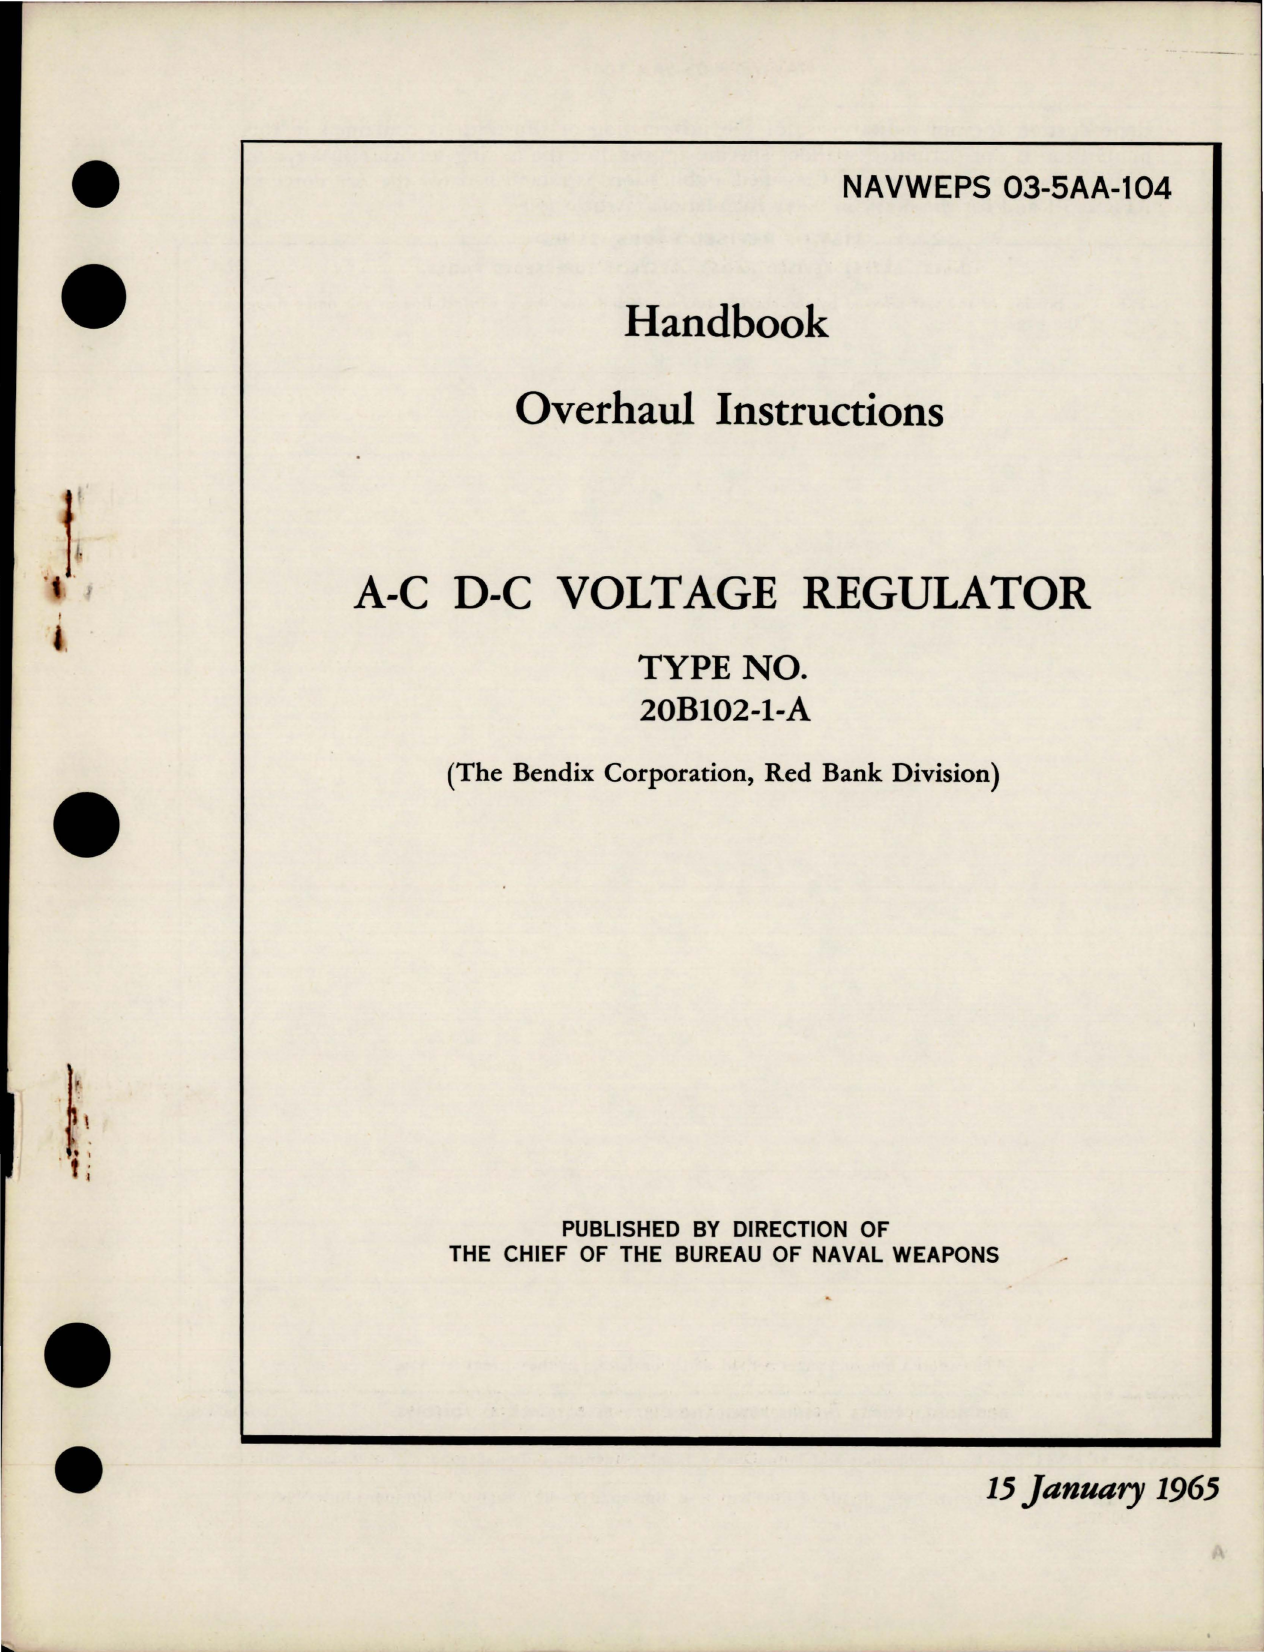 Sample page 1 from AirCorps Library document: Overhaul Instructions for AC DC Voltage Regulator - Type 20B102-1-A 